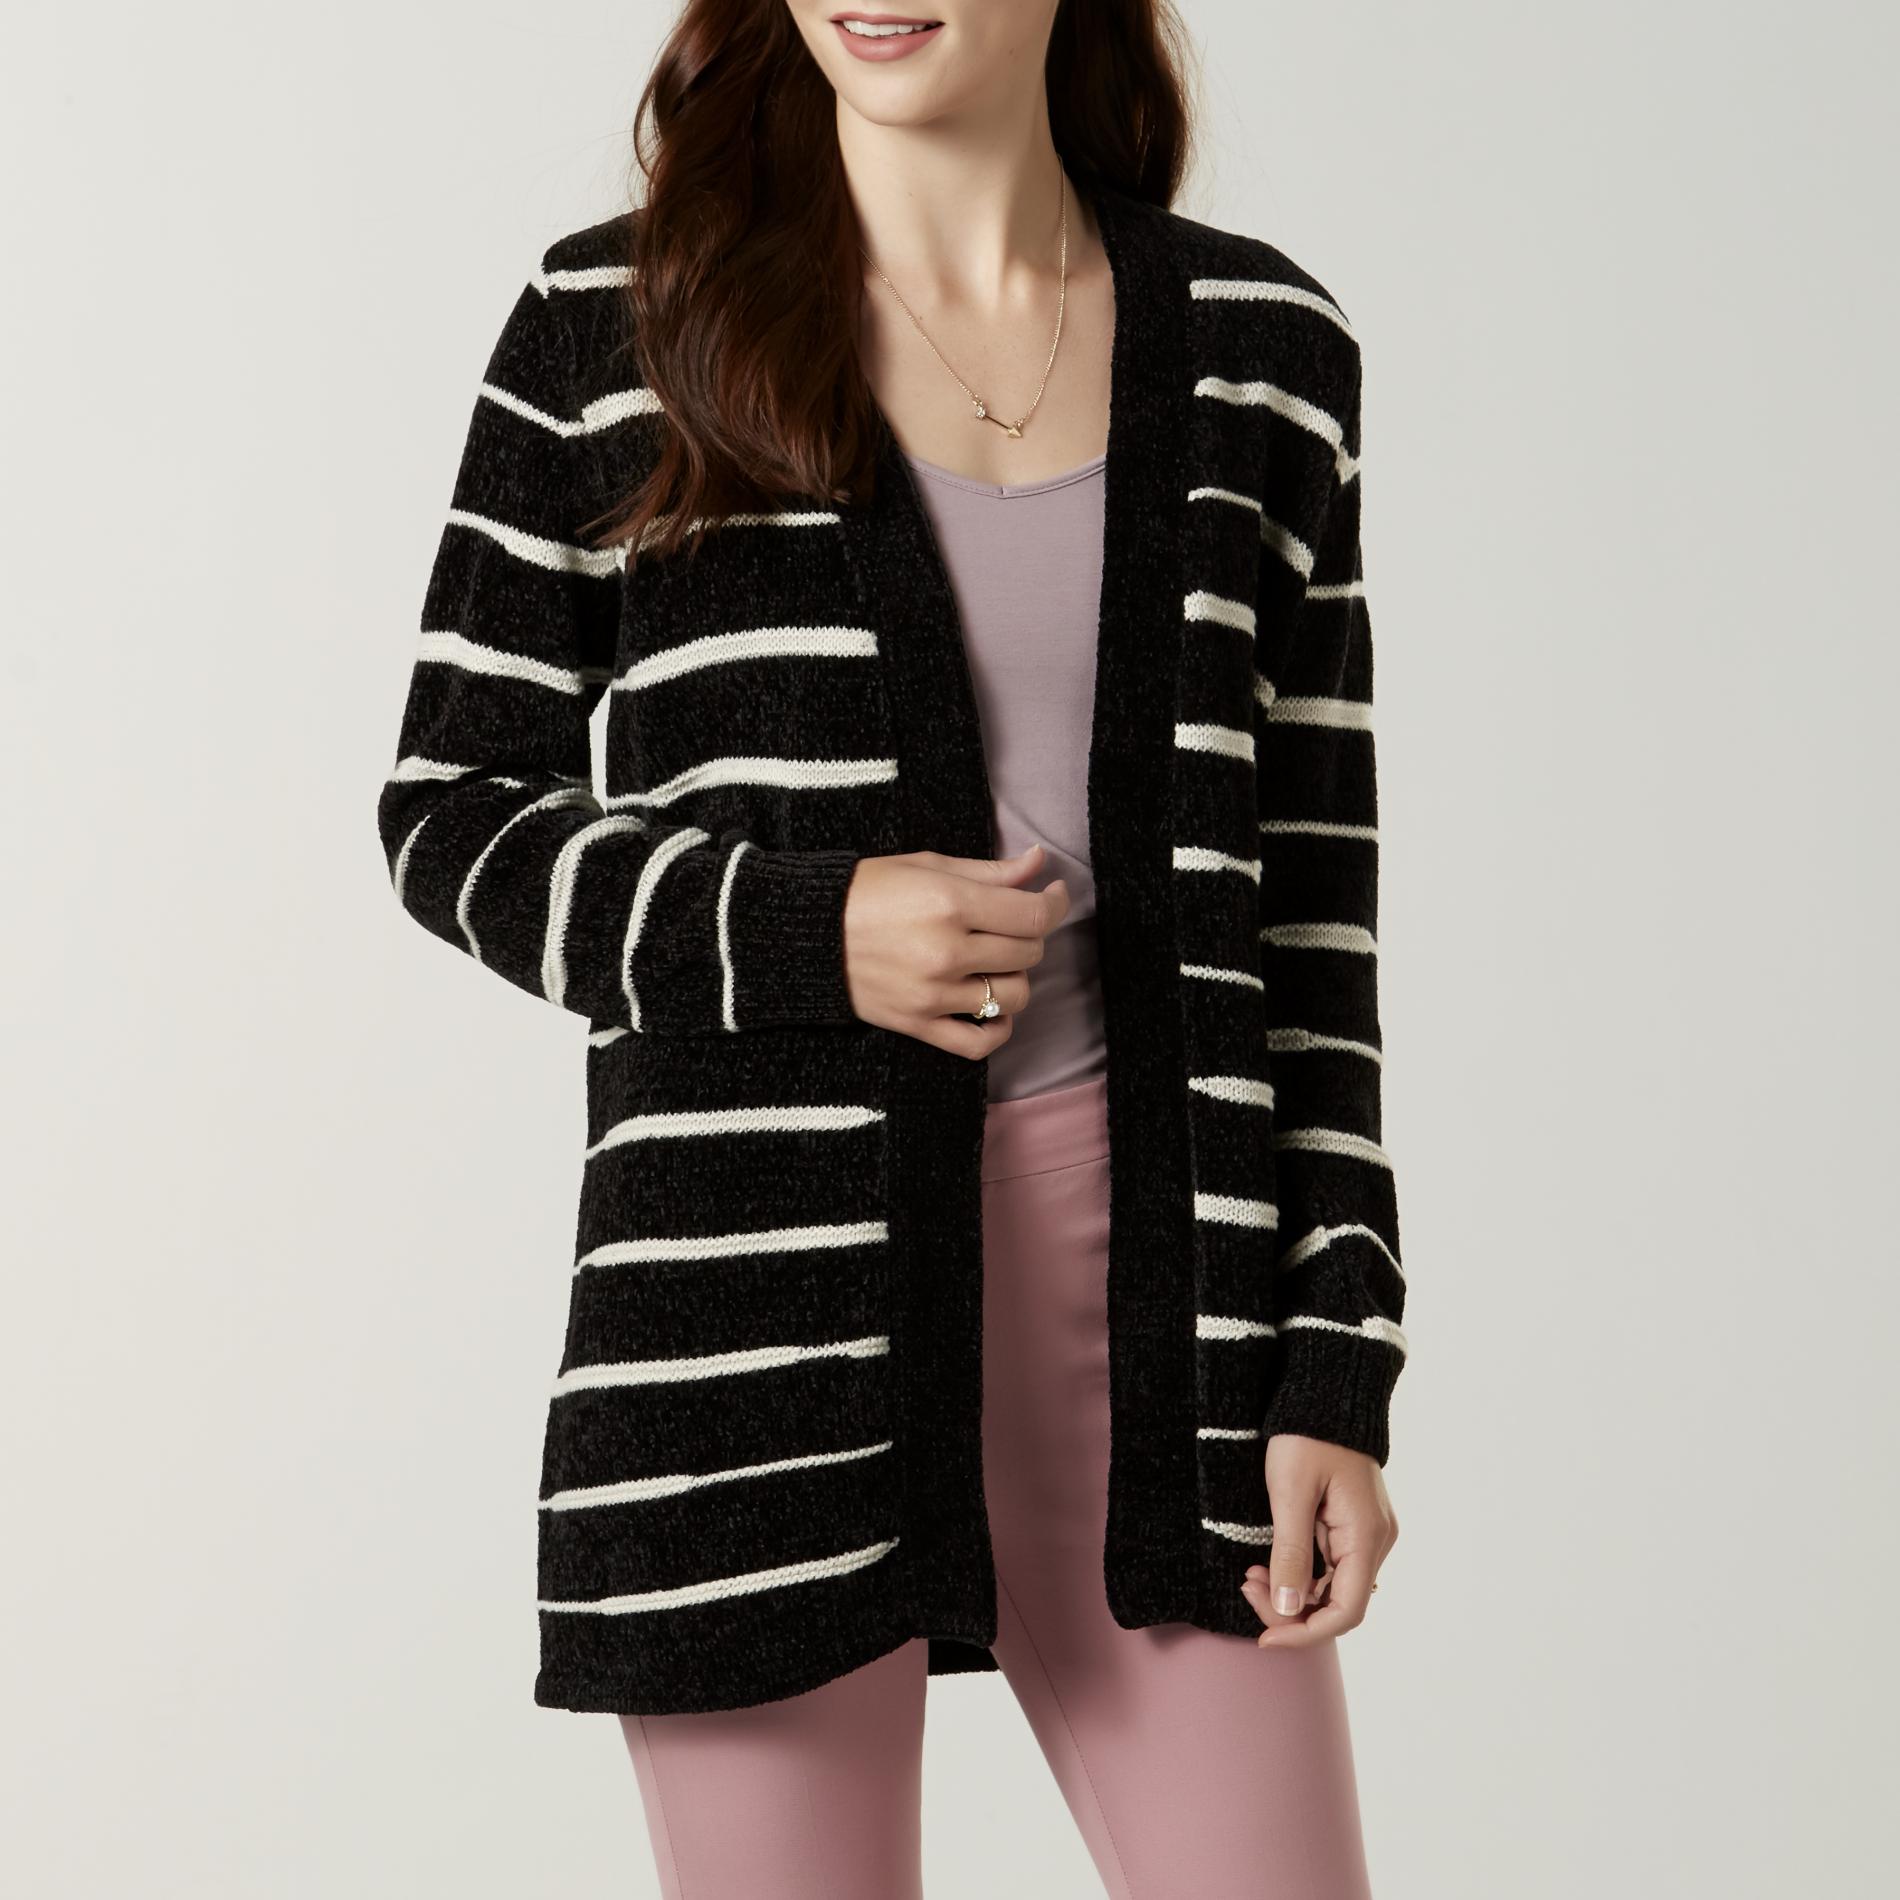 Simply Styled Women's Open Front Chenille Cardigan - Striped